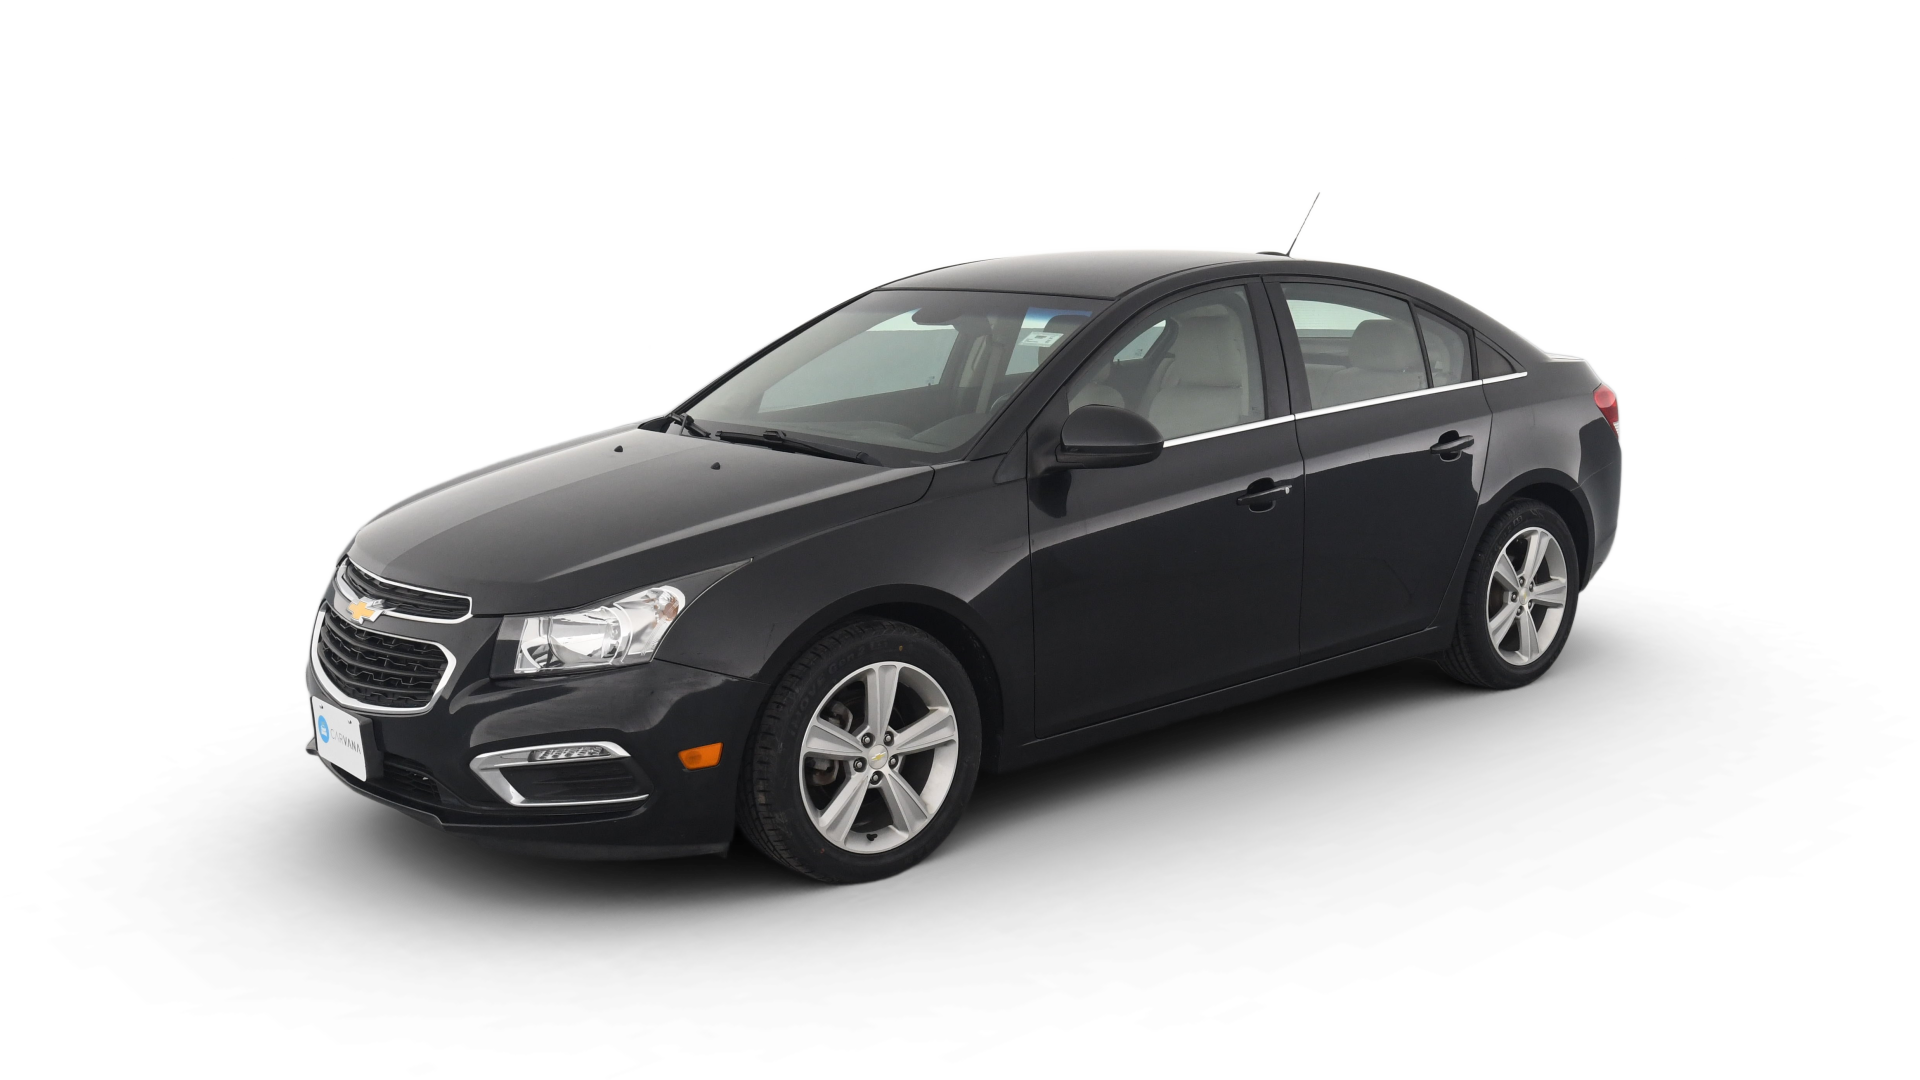 Used Chevrolet Cruze for Sale Online